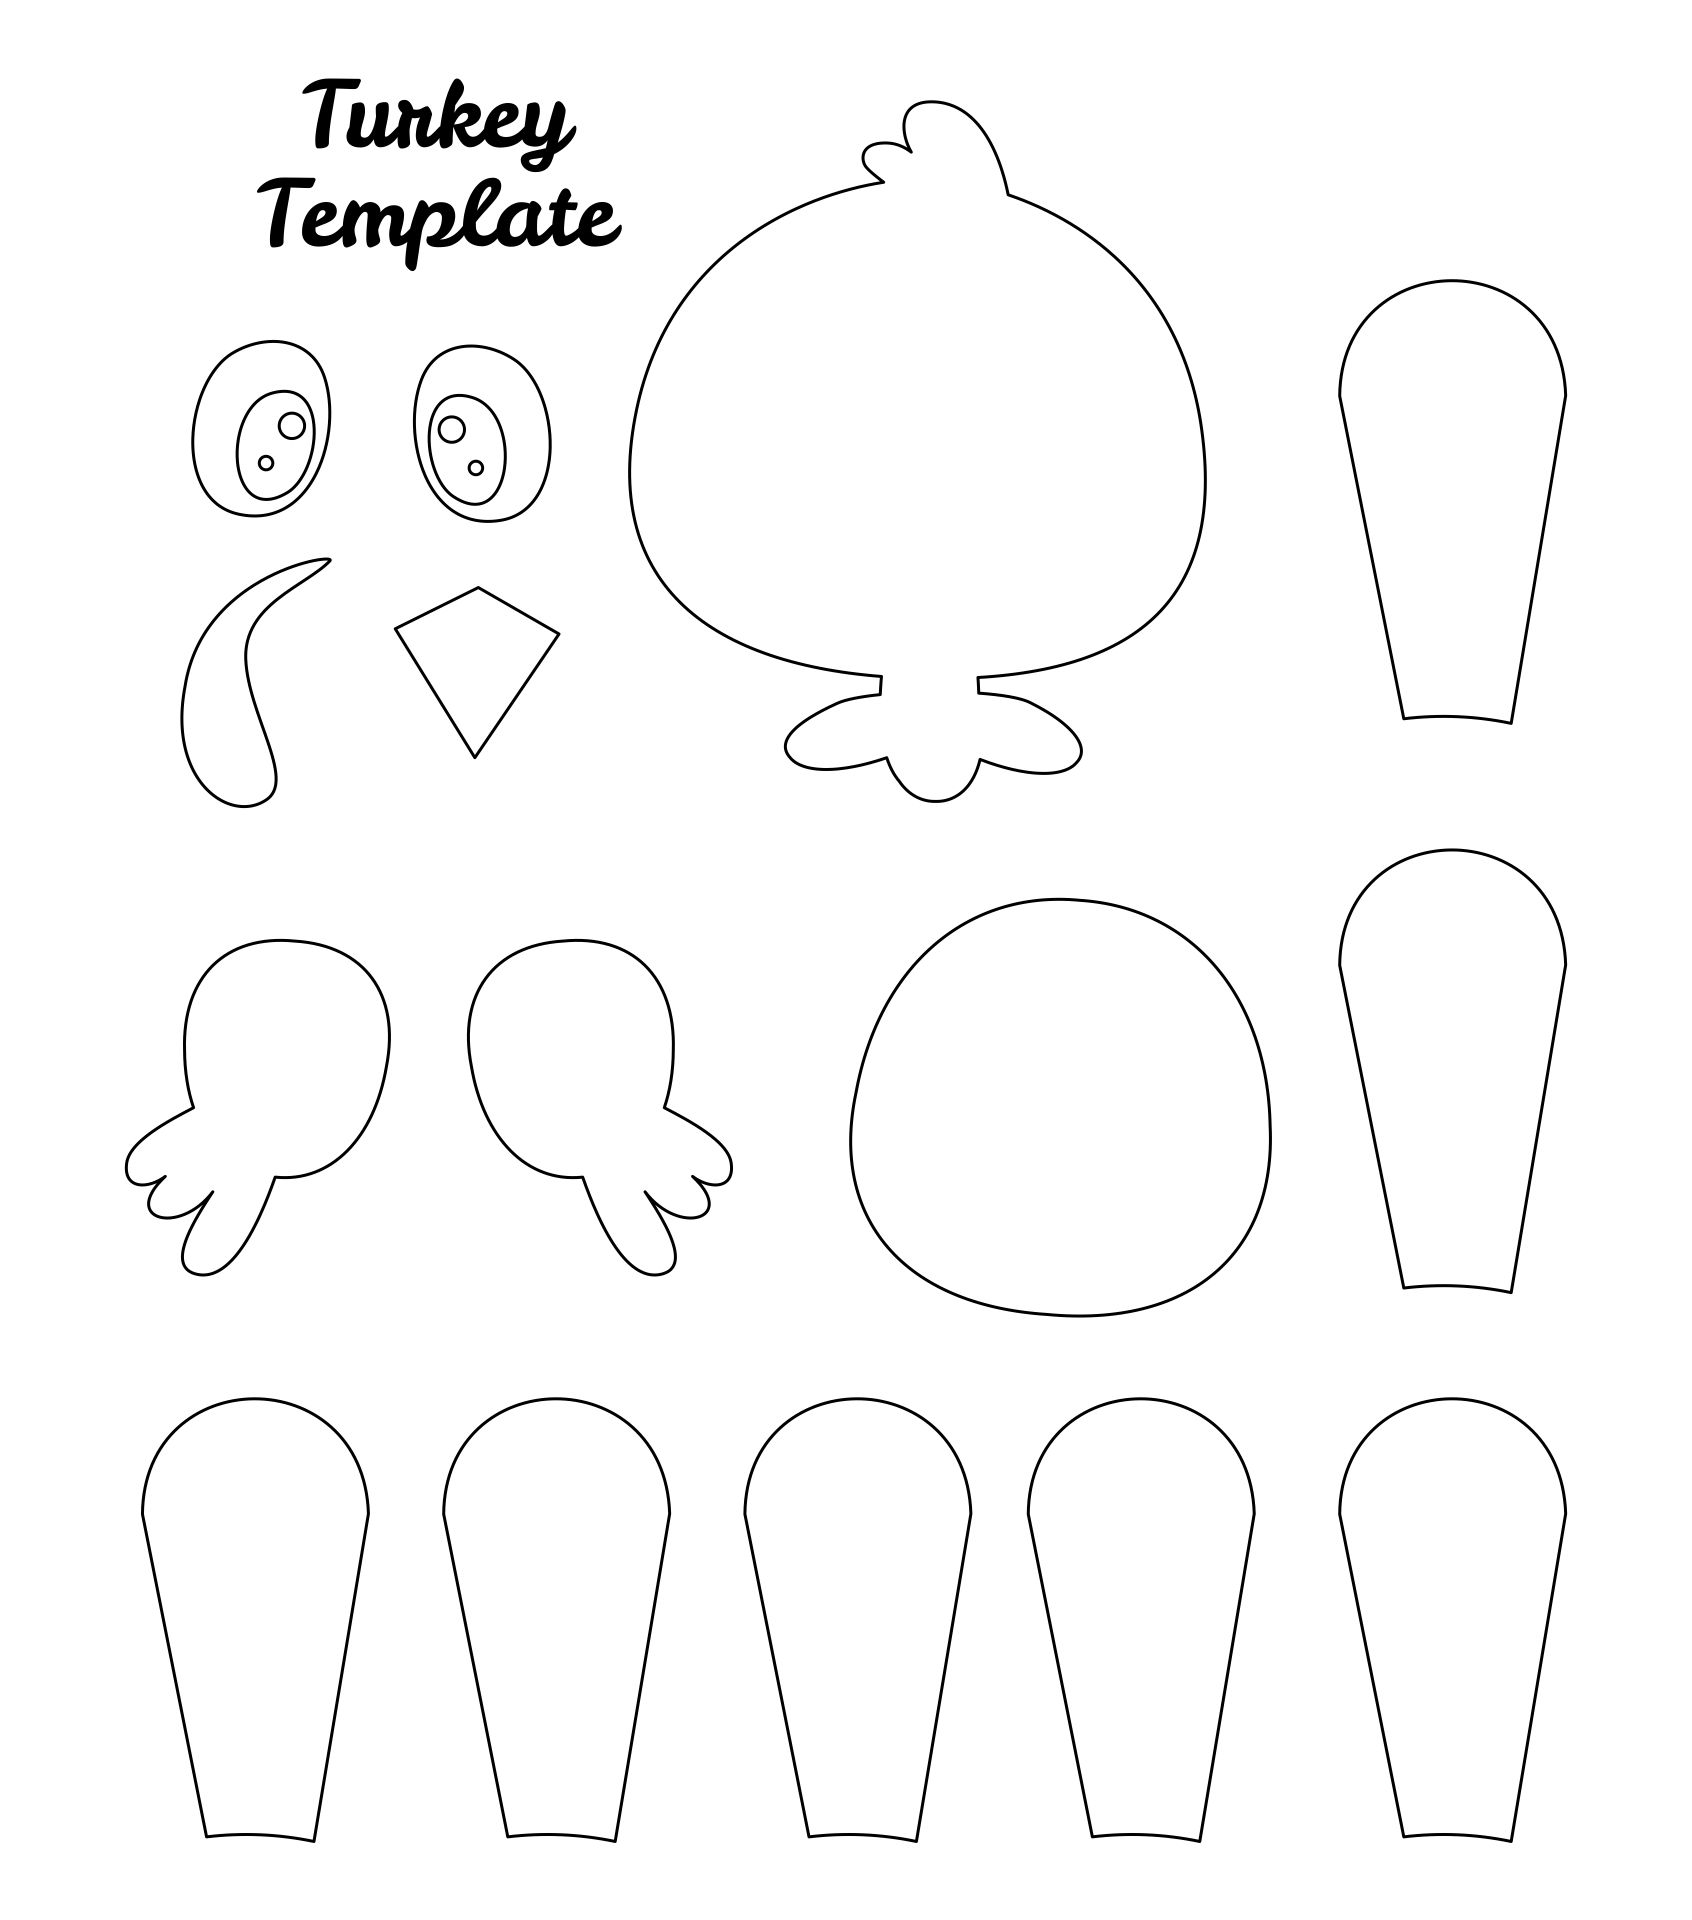 4 Best Images of Hand Turkey Template Printable Color Turkey Cut Out